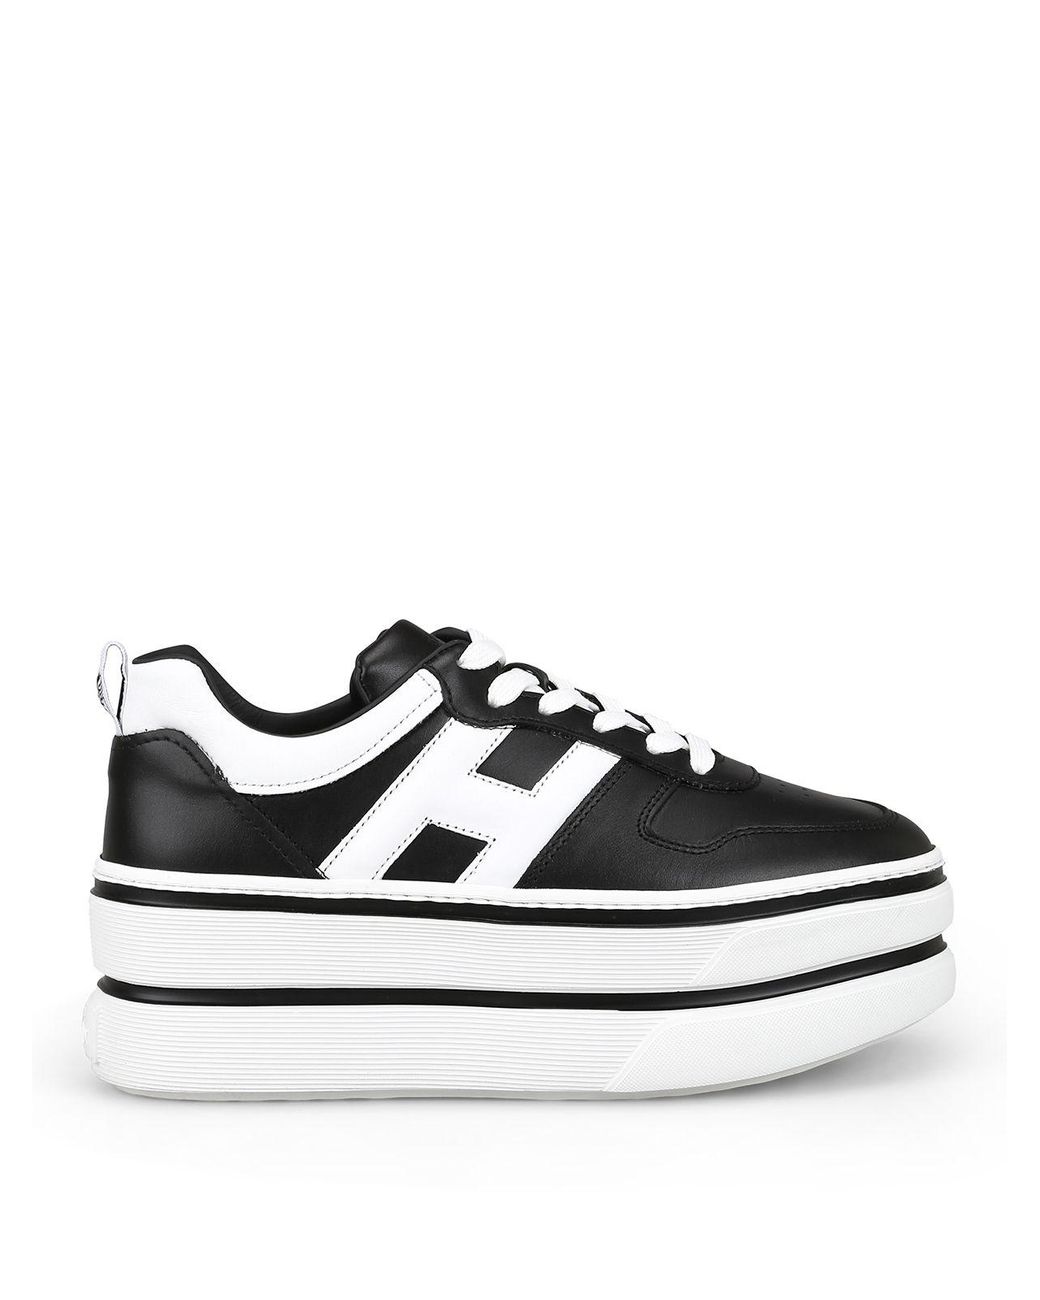 Hogan Black Leather Sneakers - Save 28% - Lyst